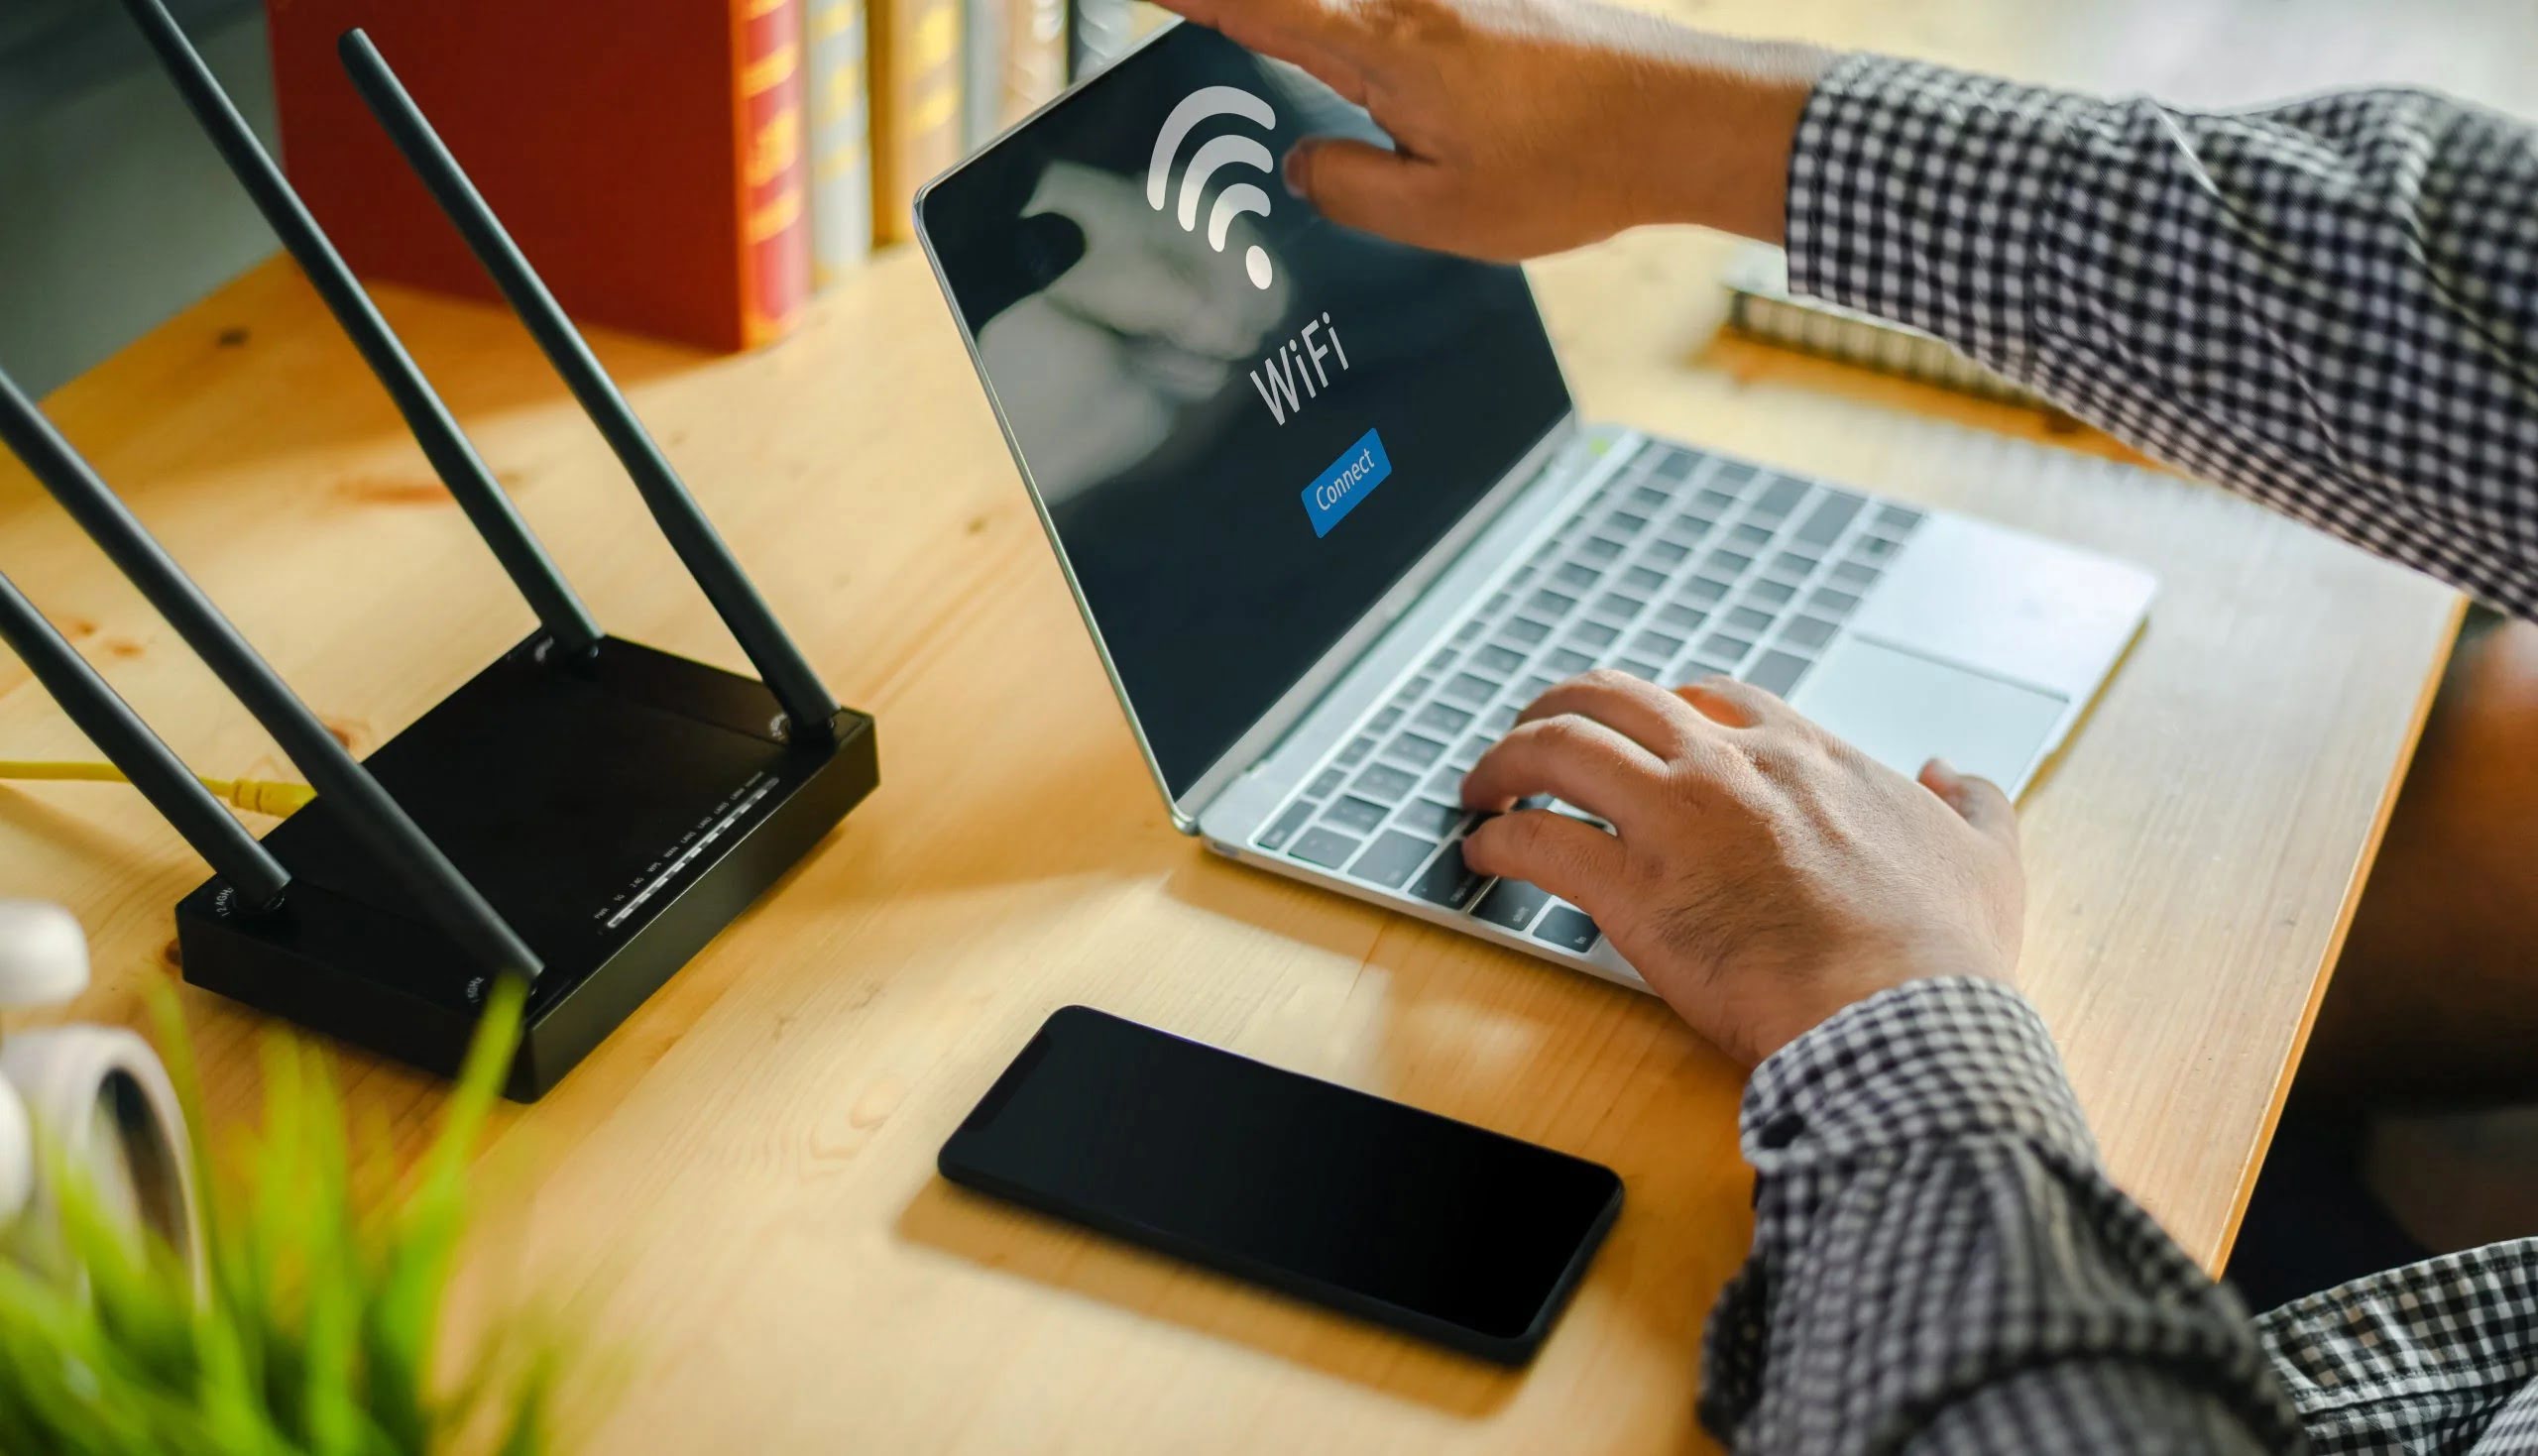 How To Connect A PC To A Wi-Fi Router